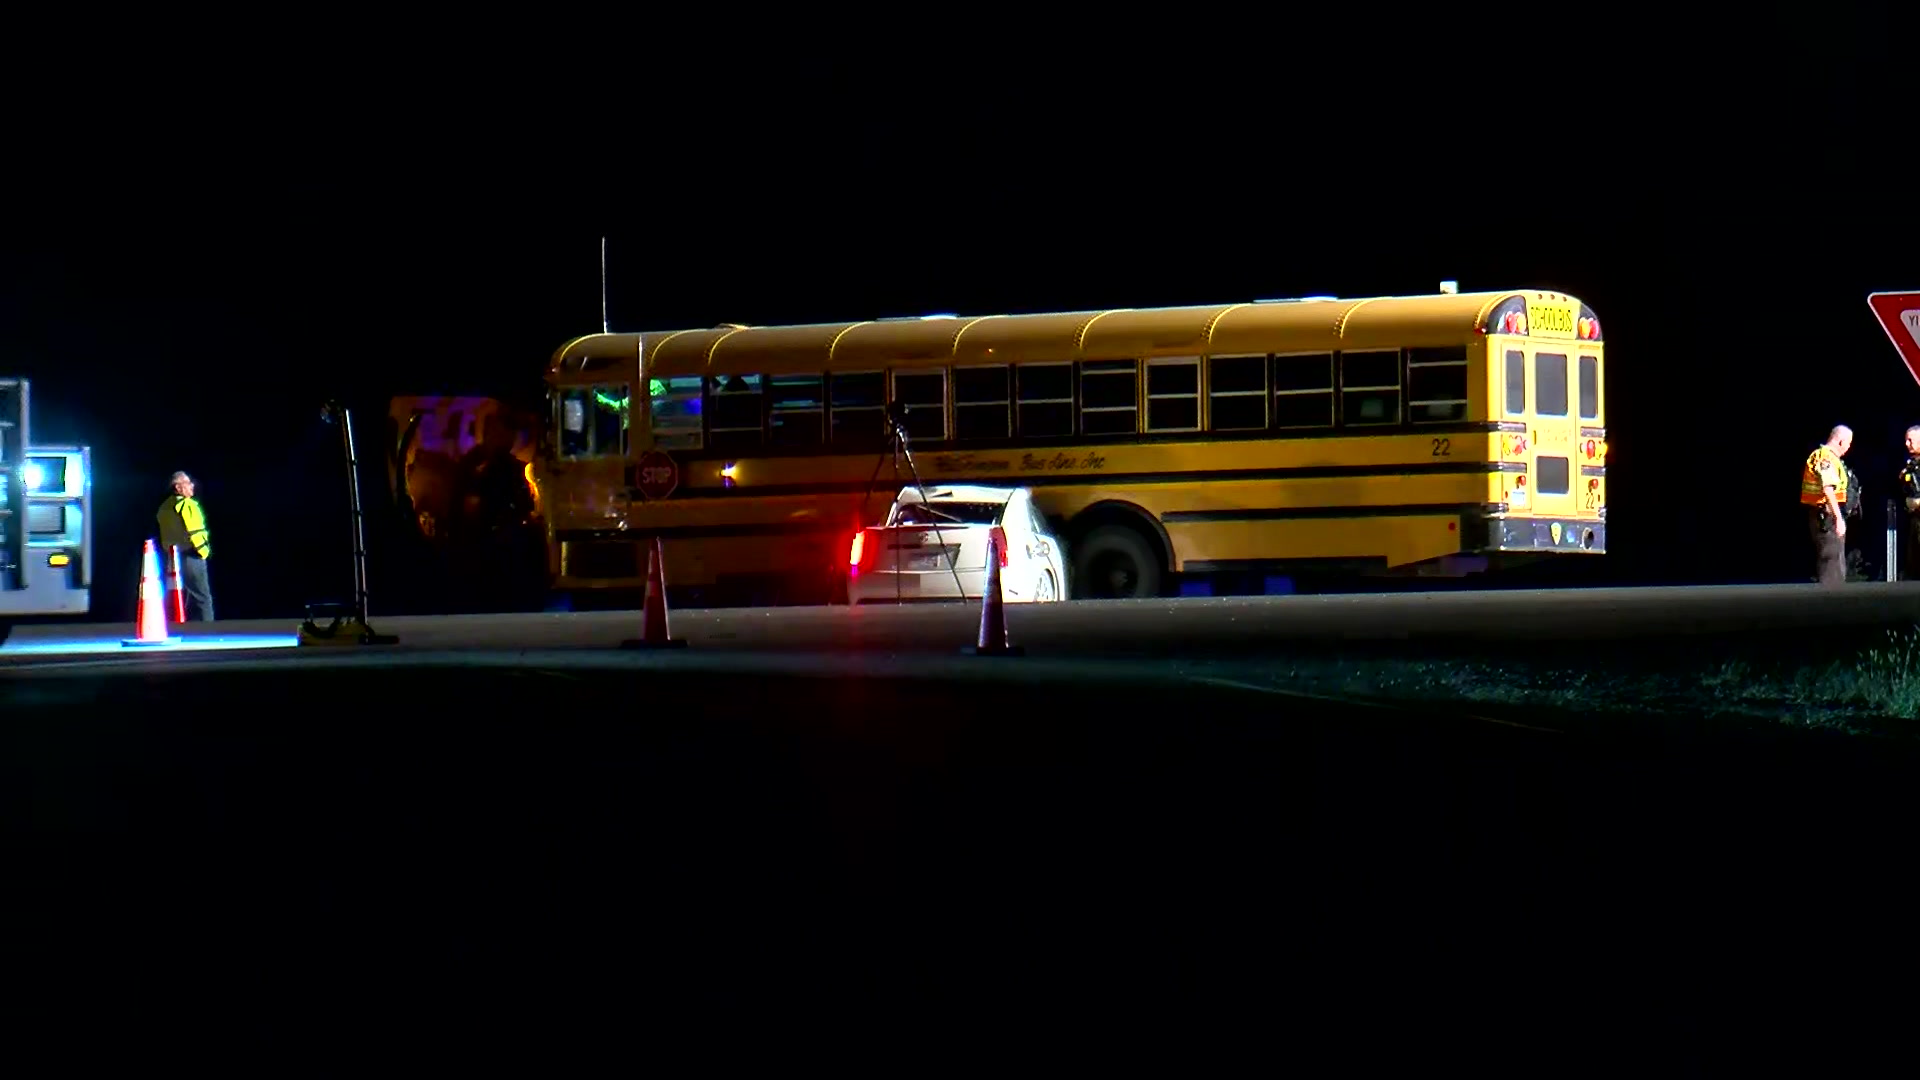 School bus t-boned by vehicle, injuring 2